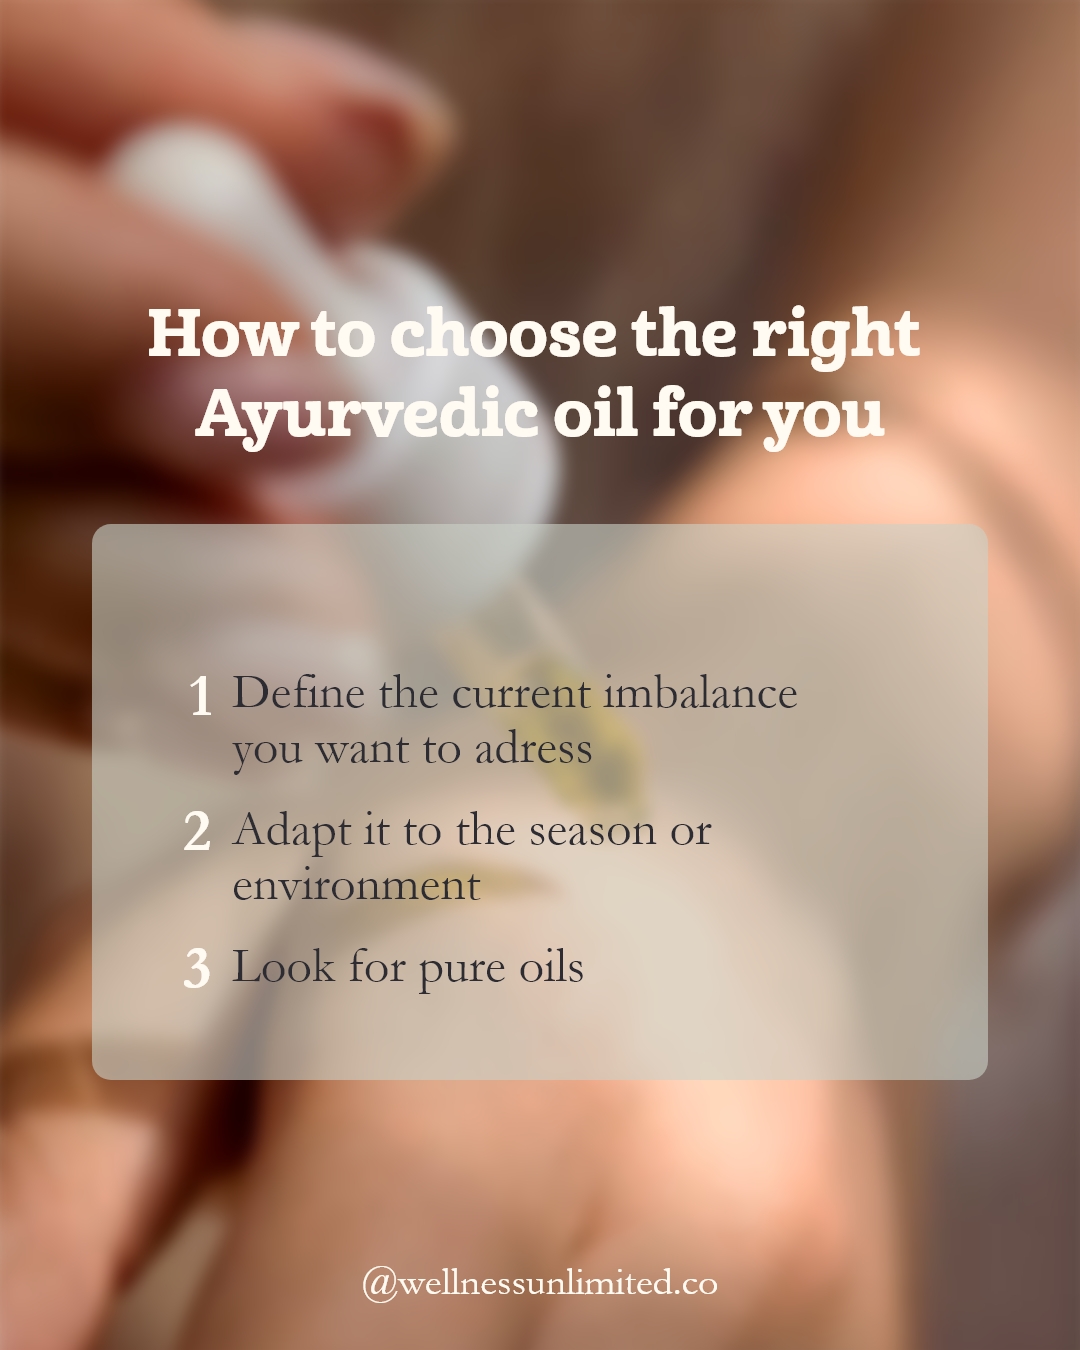 How to choose the right ayurvedic oils for your body needs